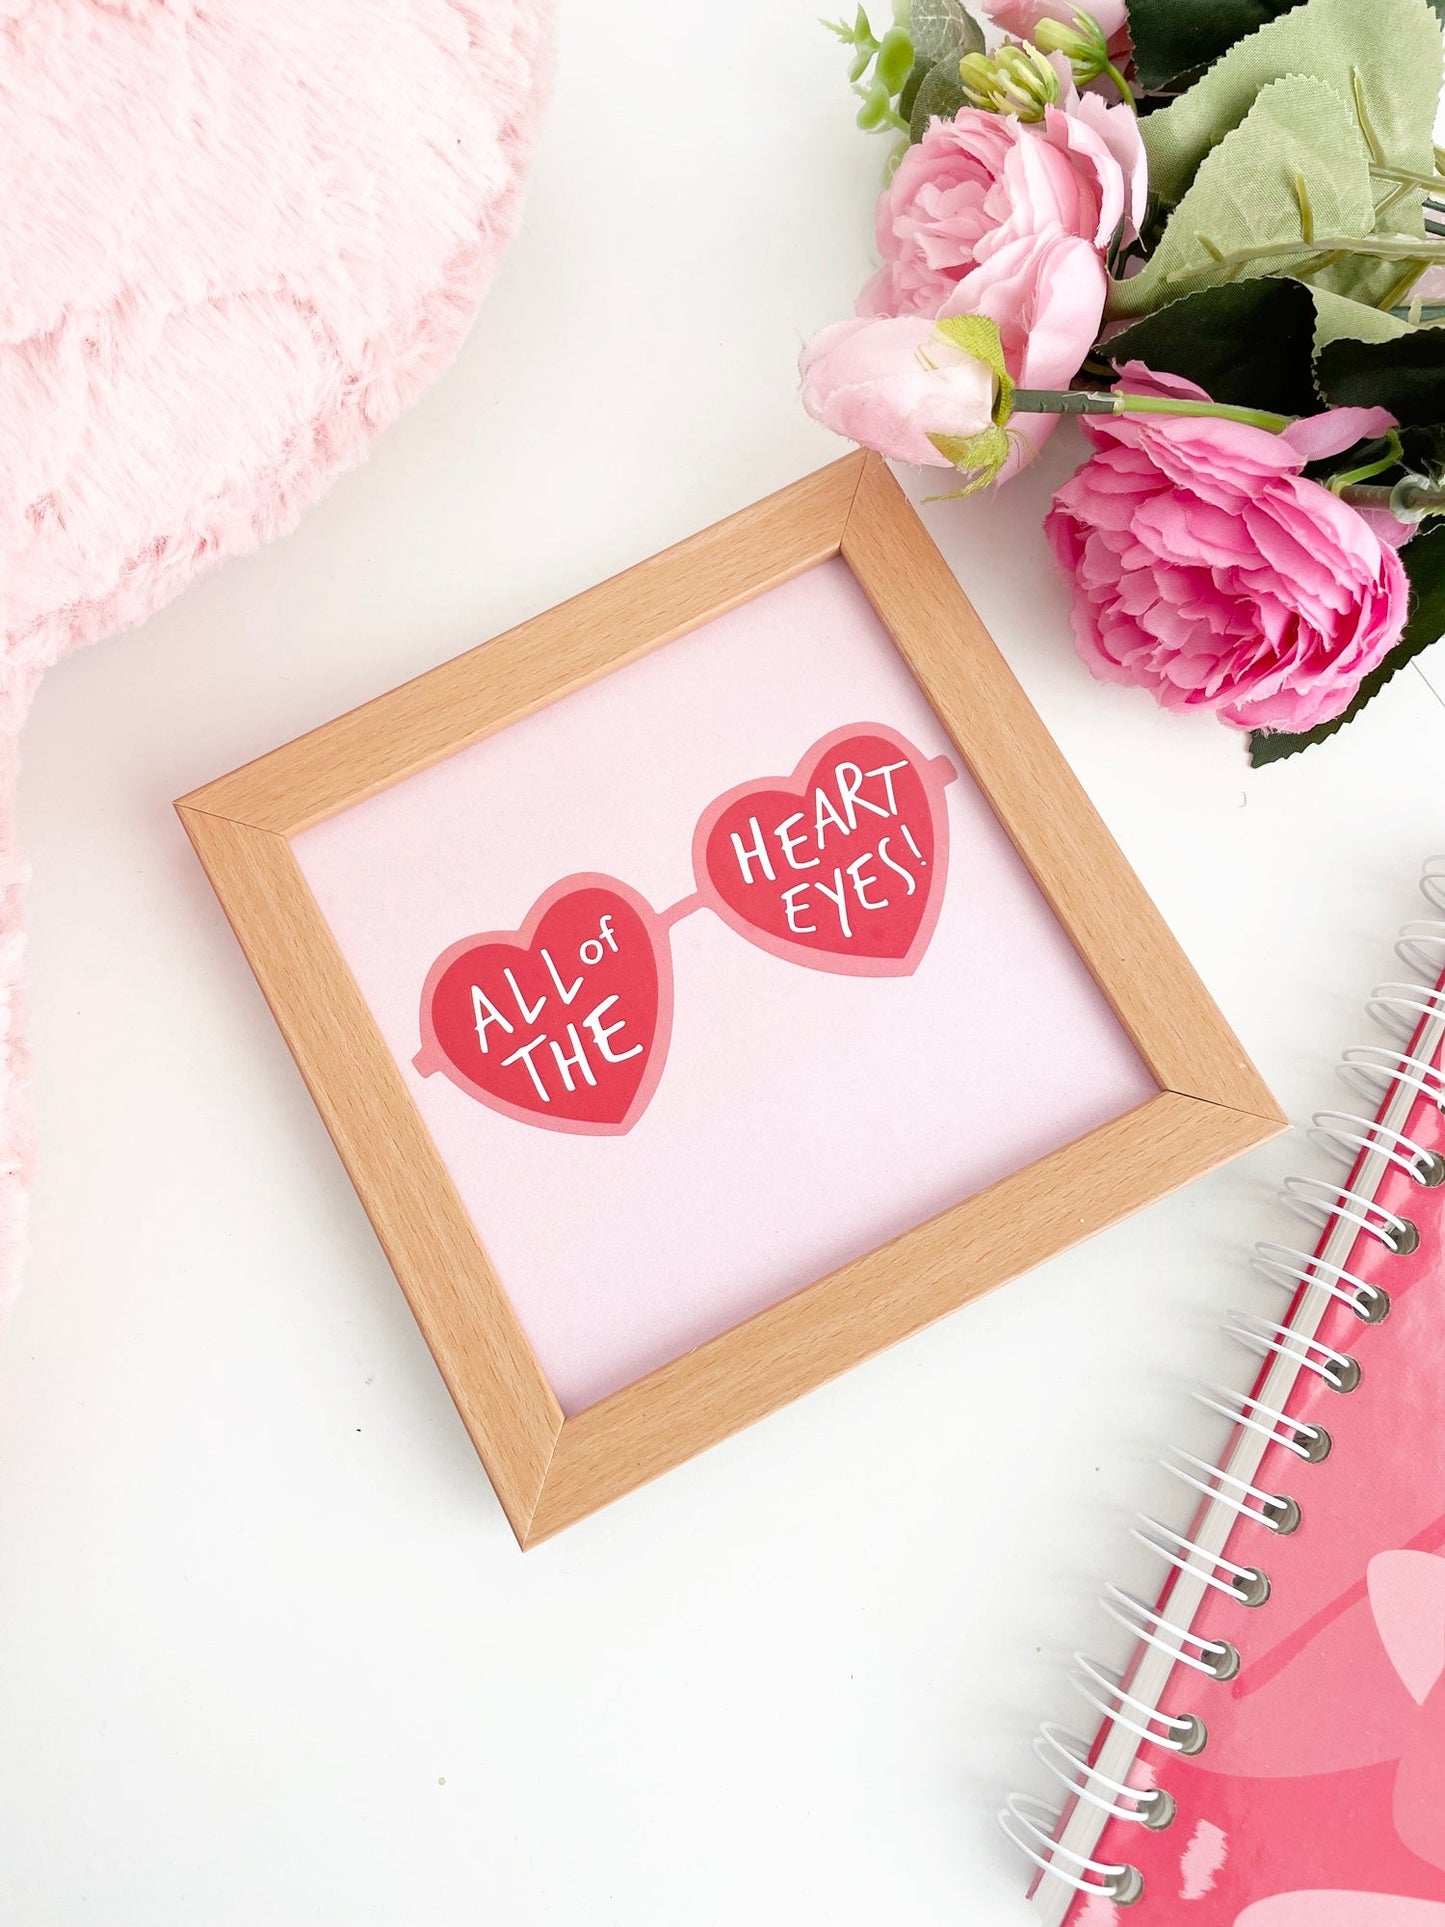 All my Heart Eyes Art with Frame | Wall & Table Top | 6x6"